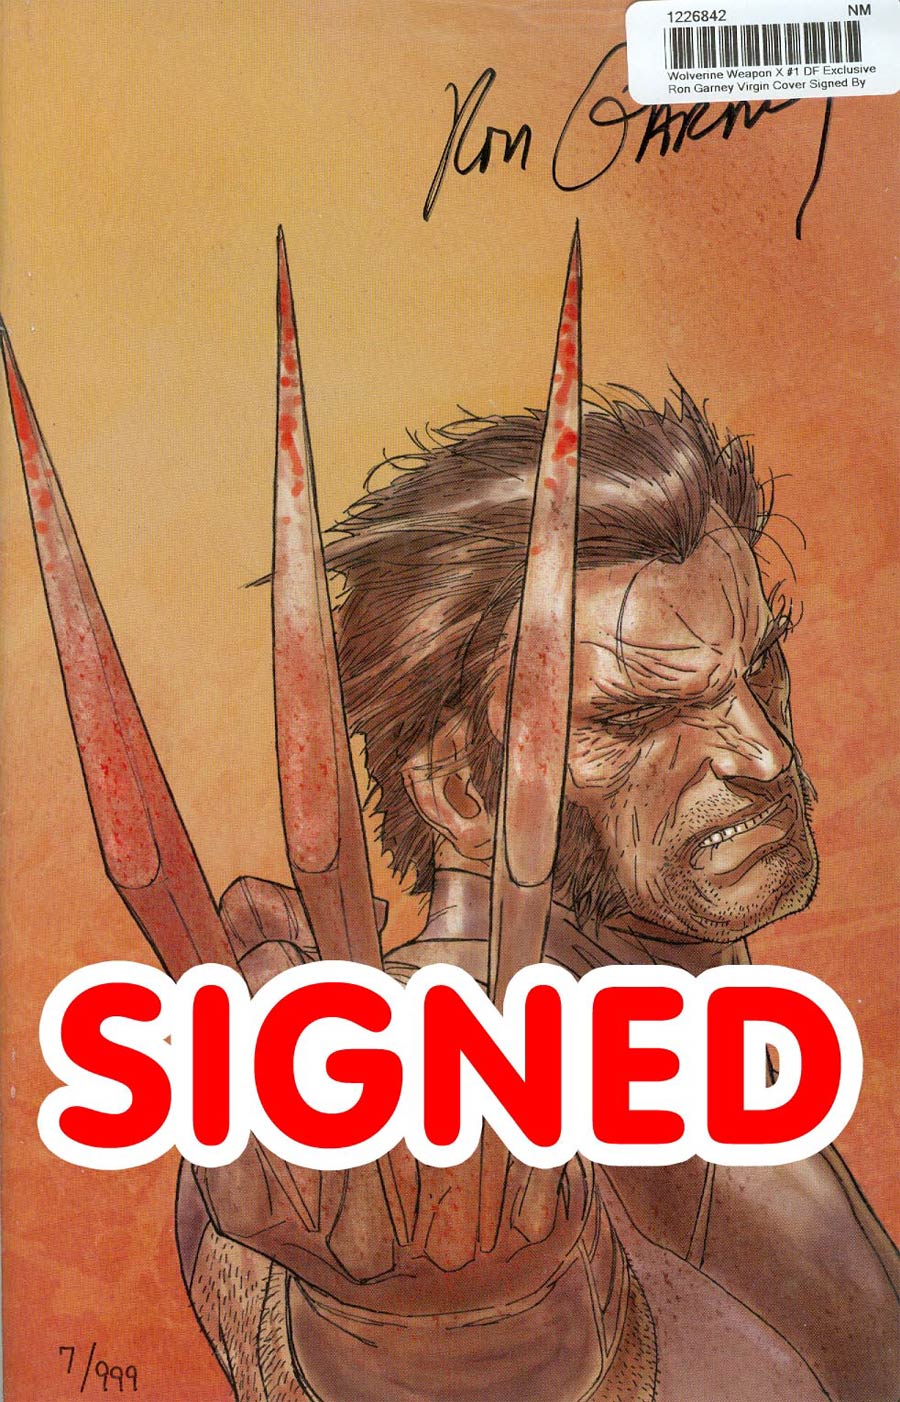 Wolverine Weapon X #1 Cover H DF Exclusive Ron Garney Virgin Cover Signed By Ron Garney